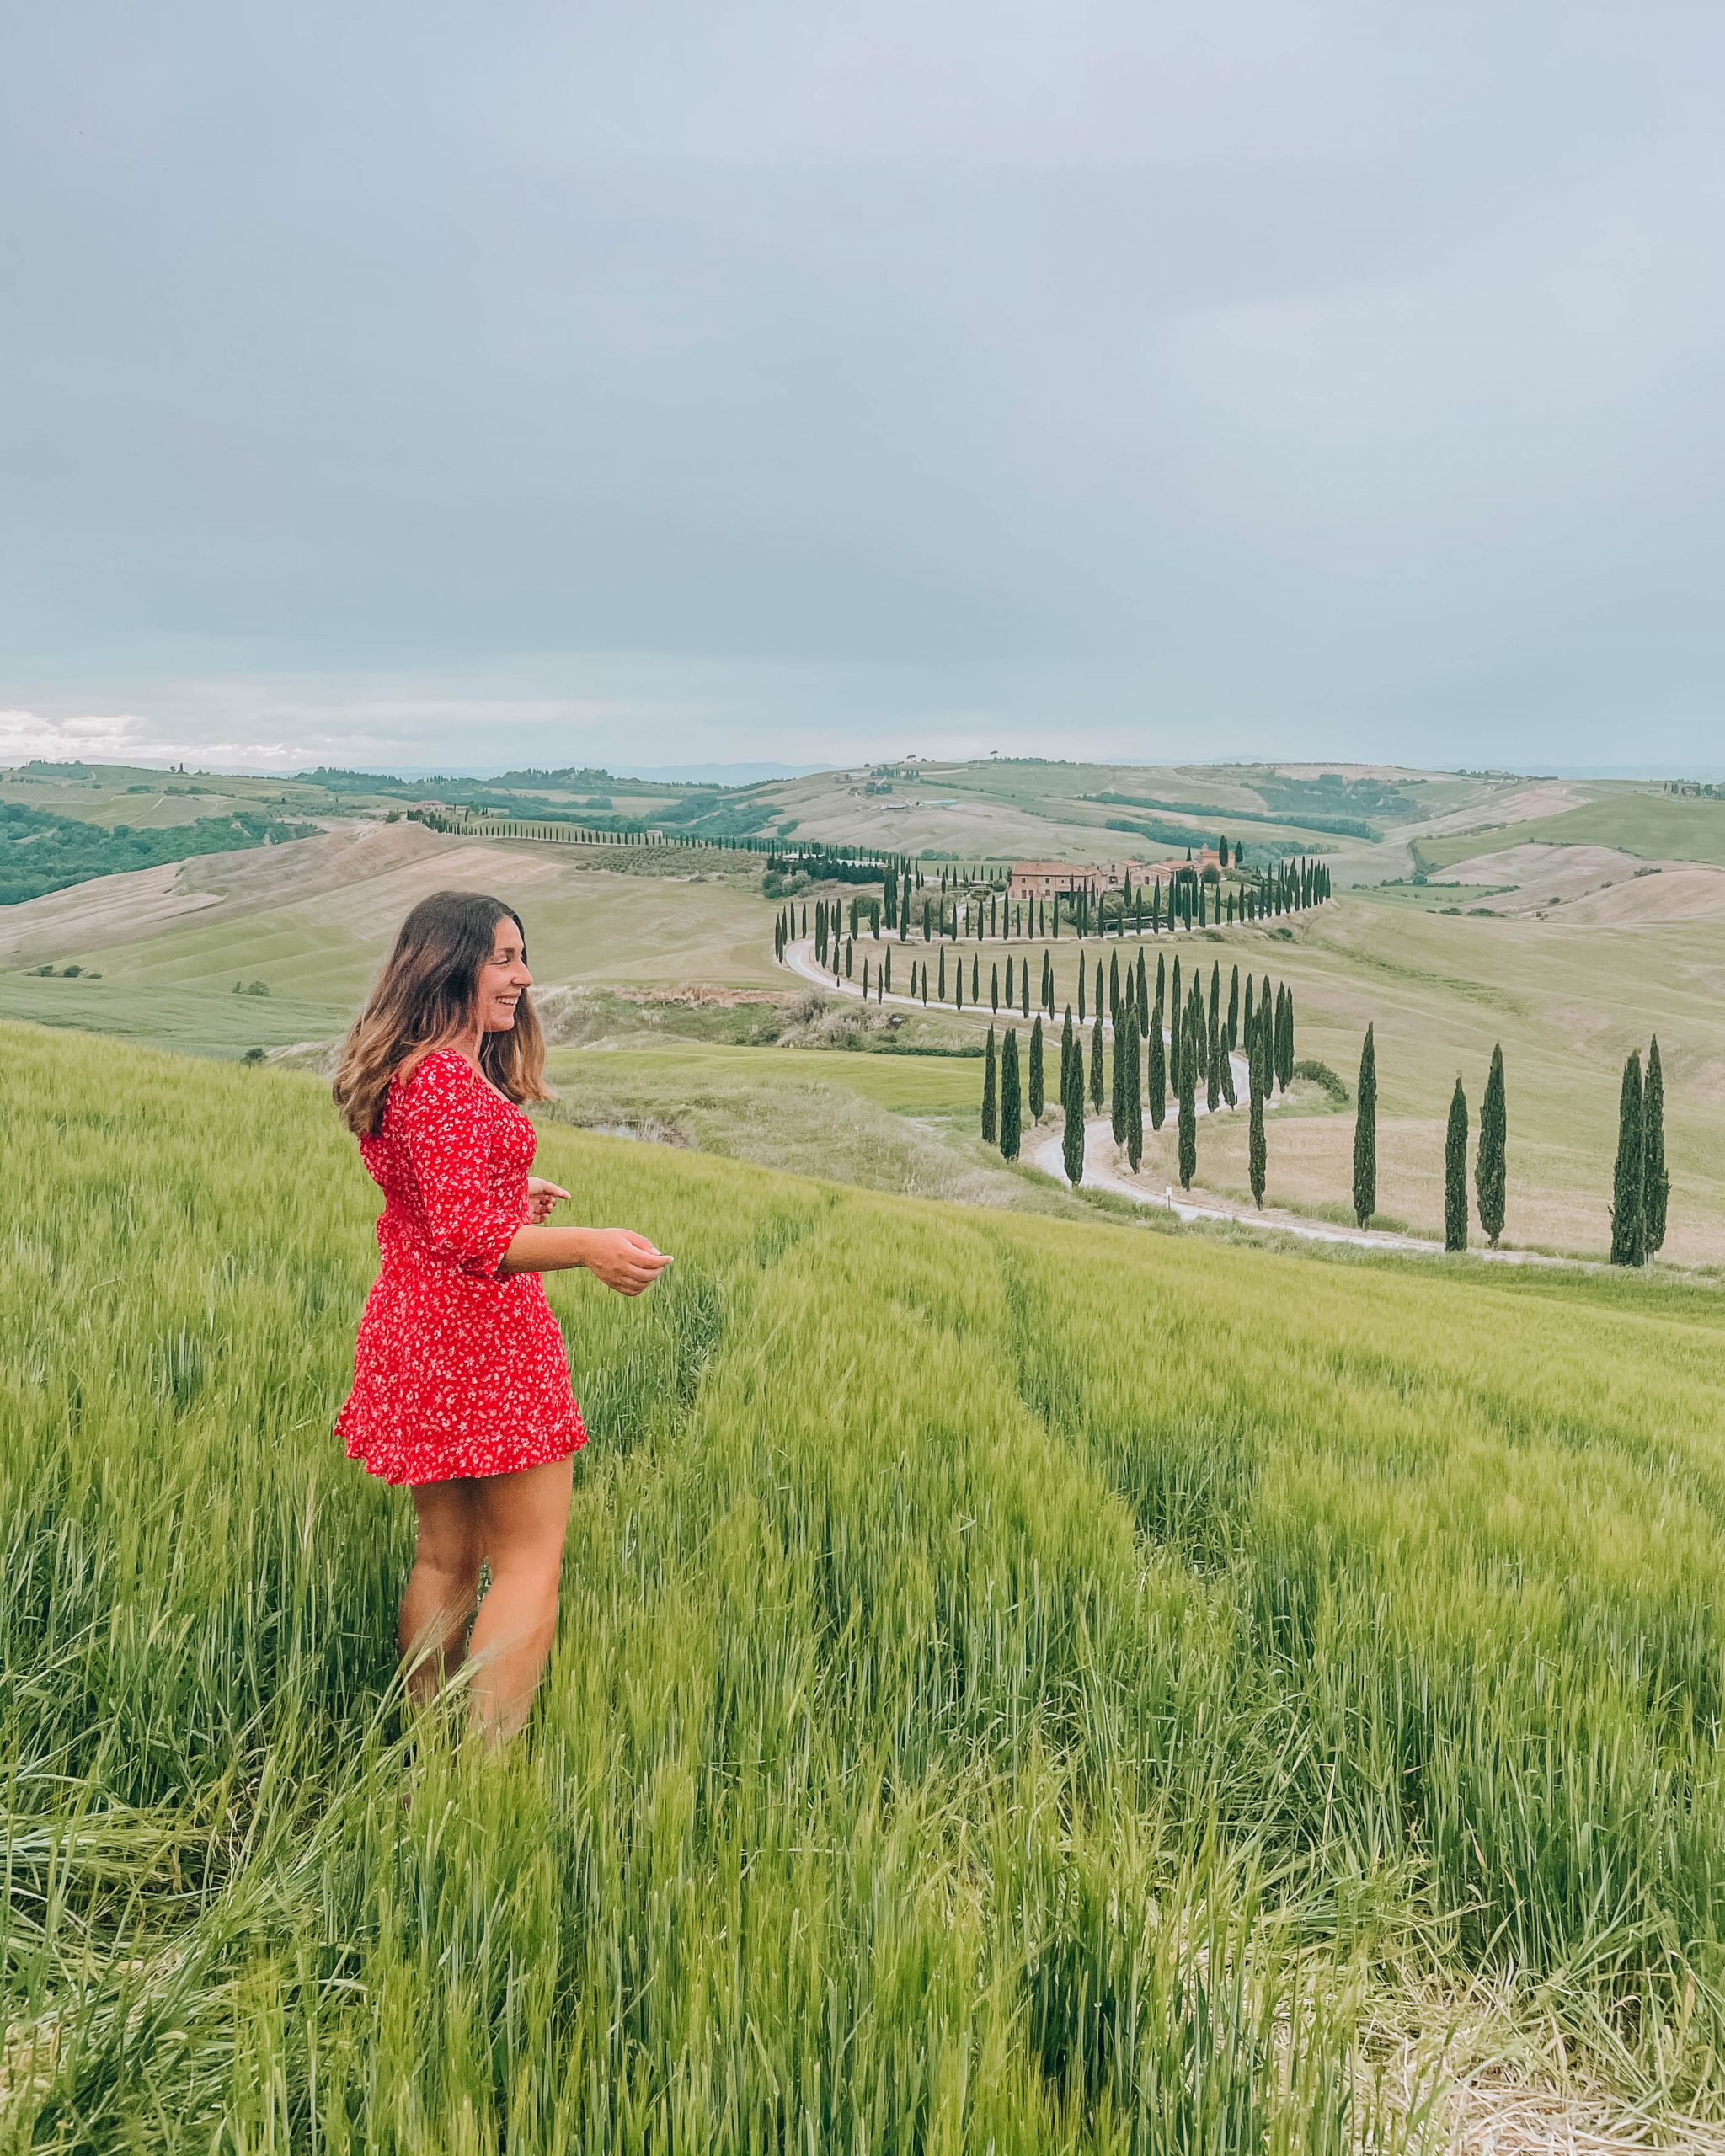 luoghi instagrammabili in val d'Orcia